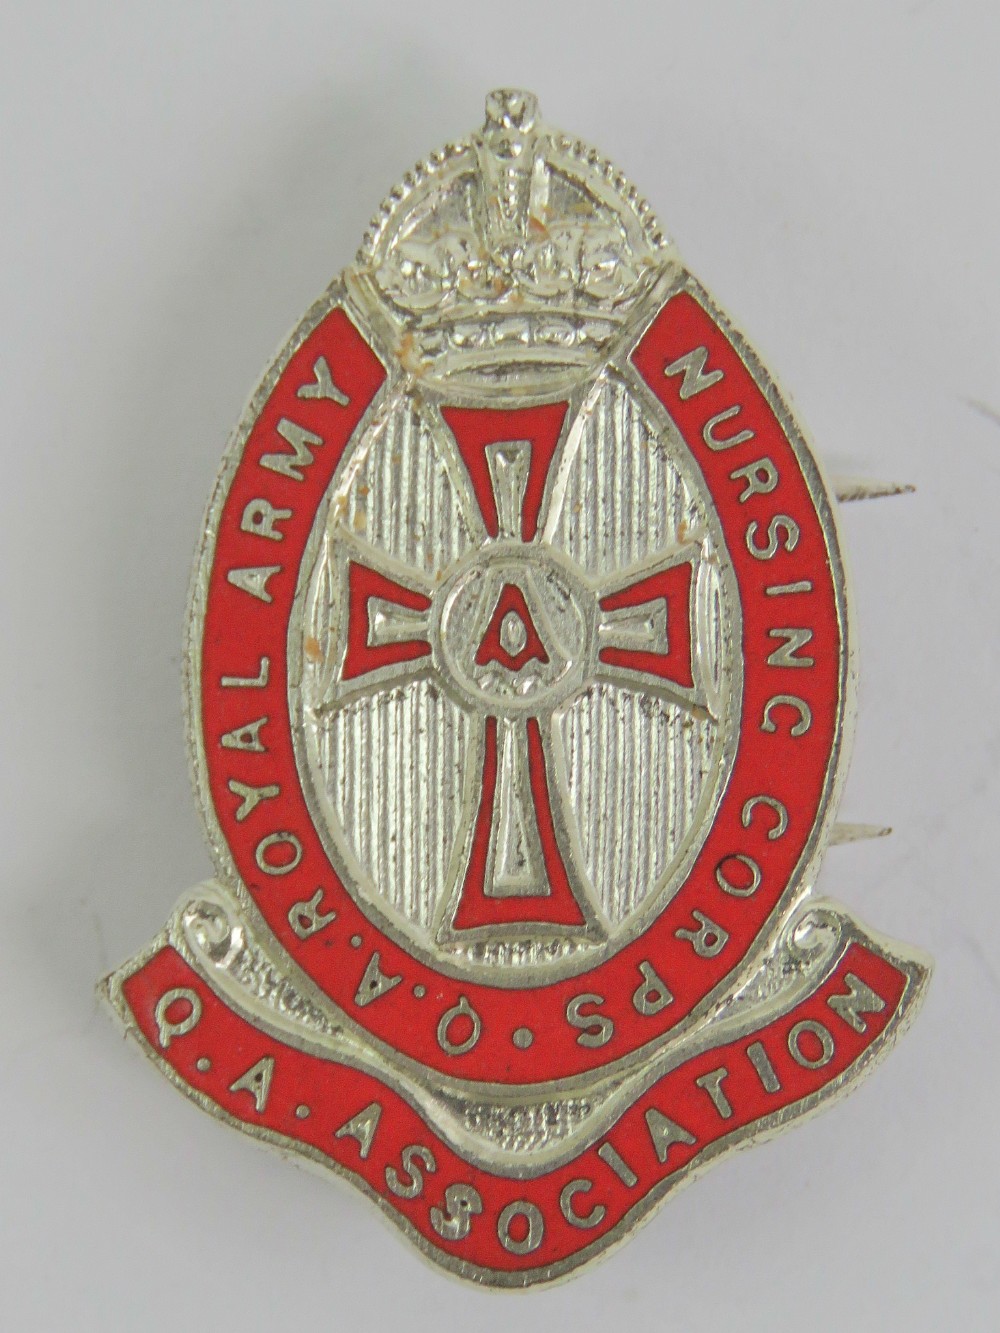 A Queen Alexandra's Royal Army Nursing Corps Association badge inlaid with red enamel, made by J.R.